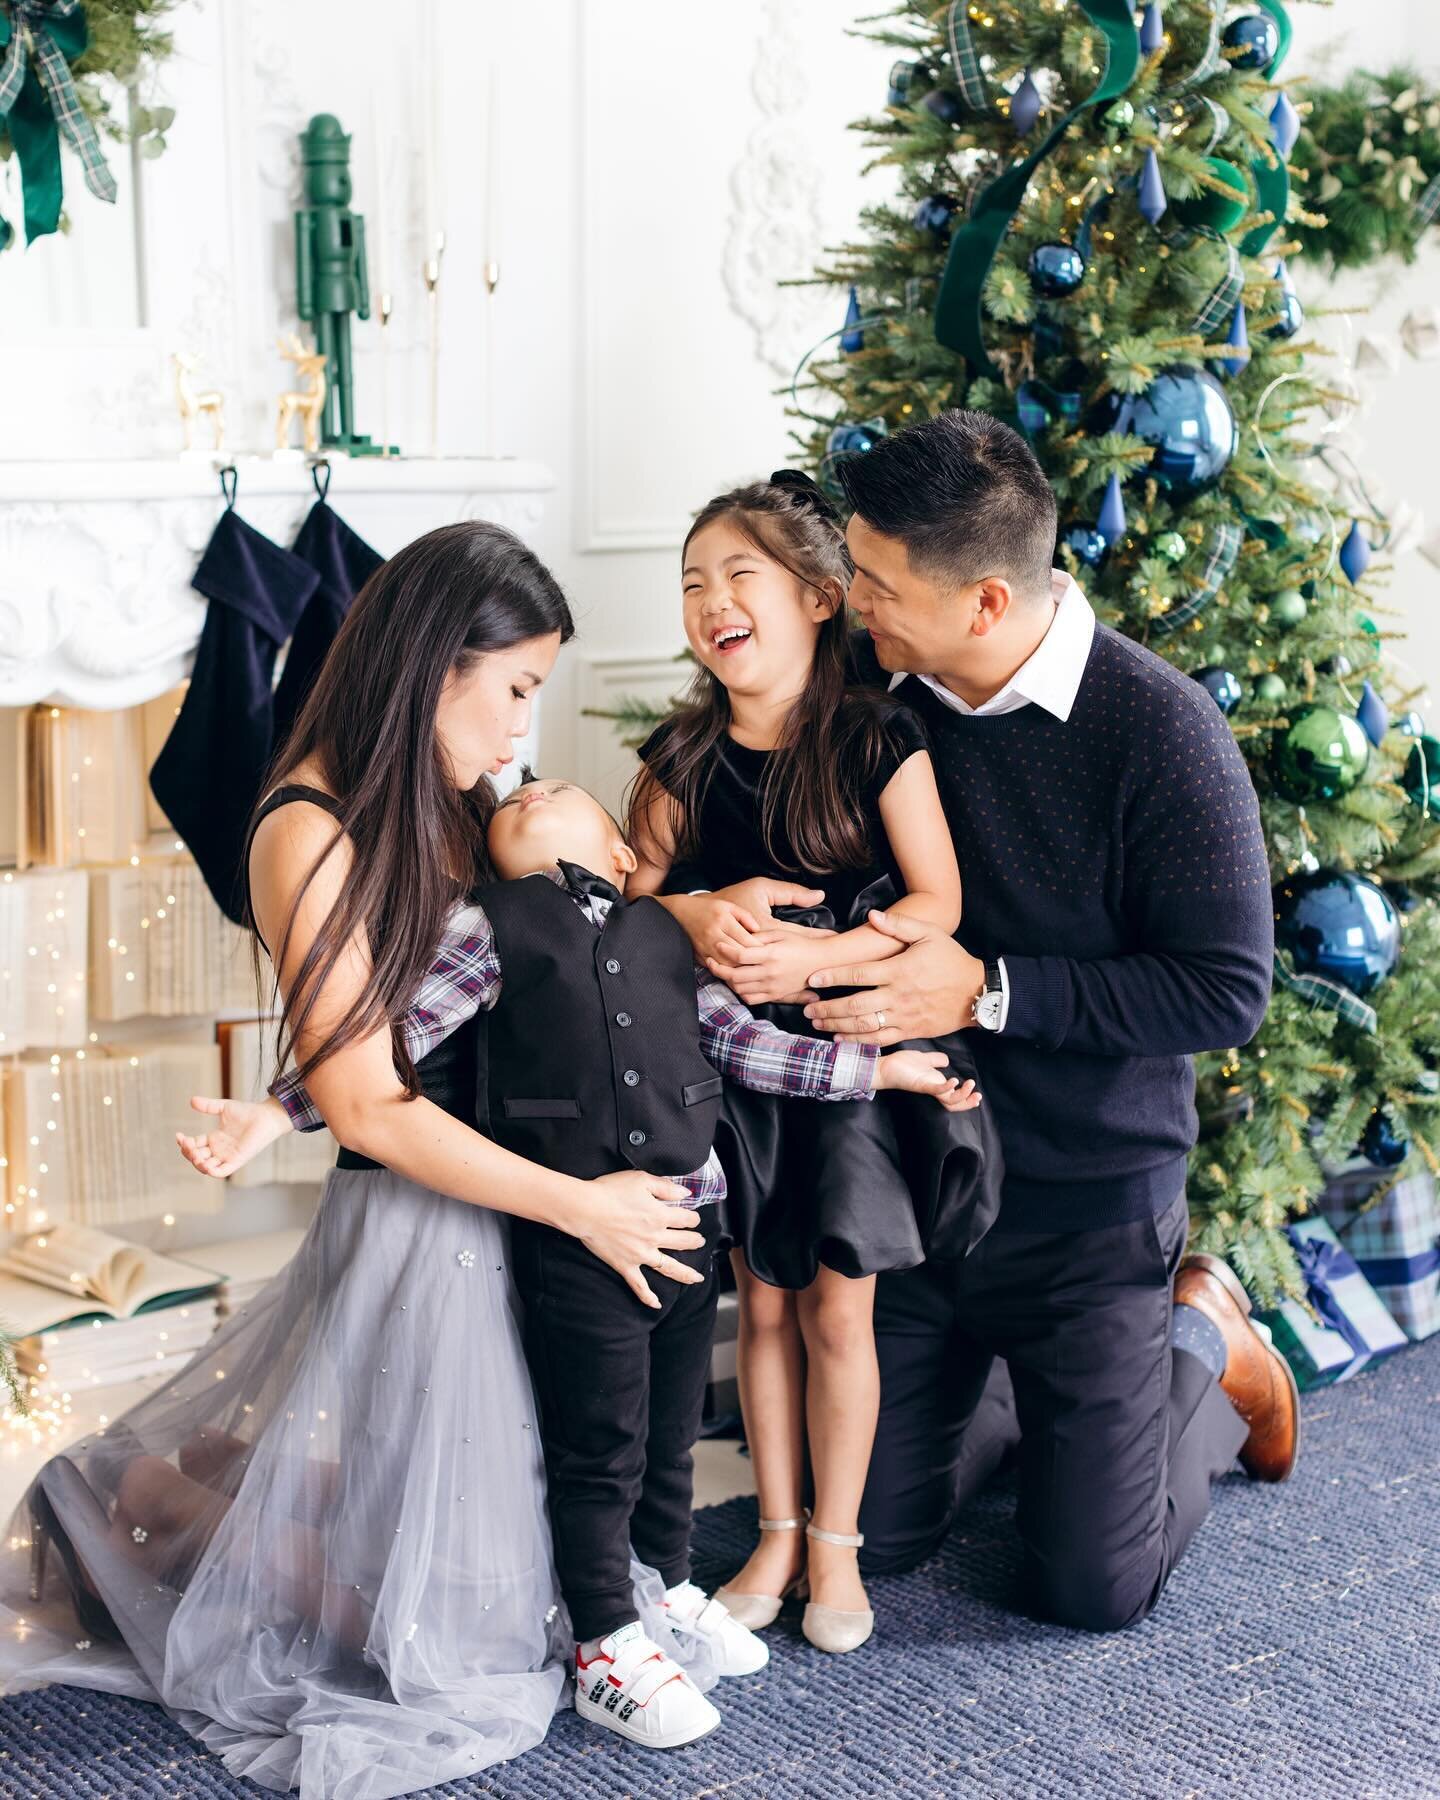 How is time flying so fast?! We are officially already HALFWAY through our Christmas season. 🎄Check out @bubble.bee.studio - our beautiful client May runs a gorgeous balloon and birthday rental company for all of your upcoming celebrations!🎈

#mint